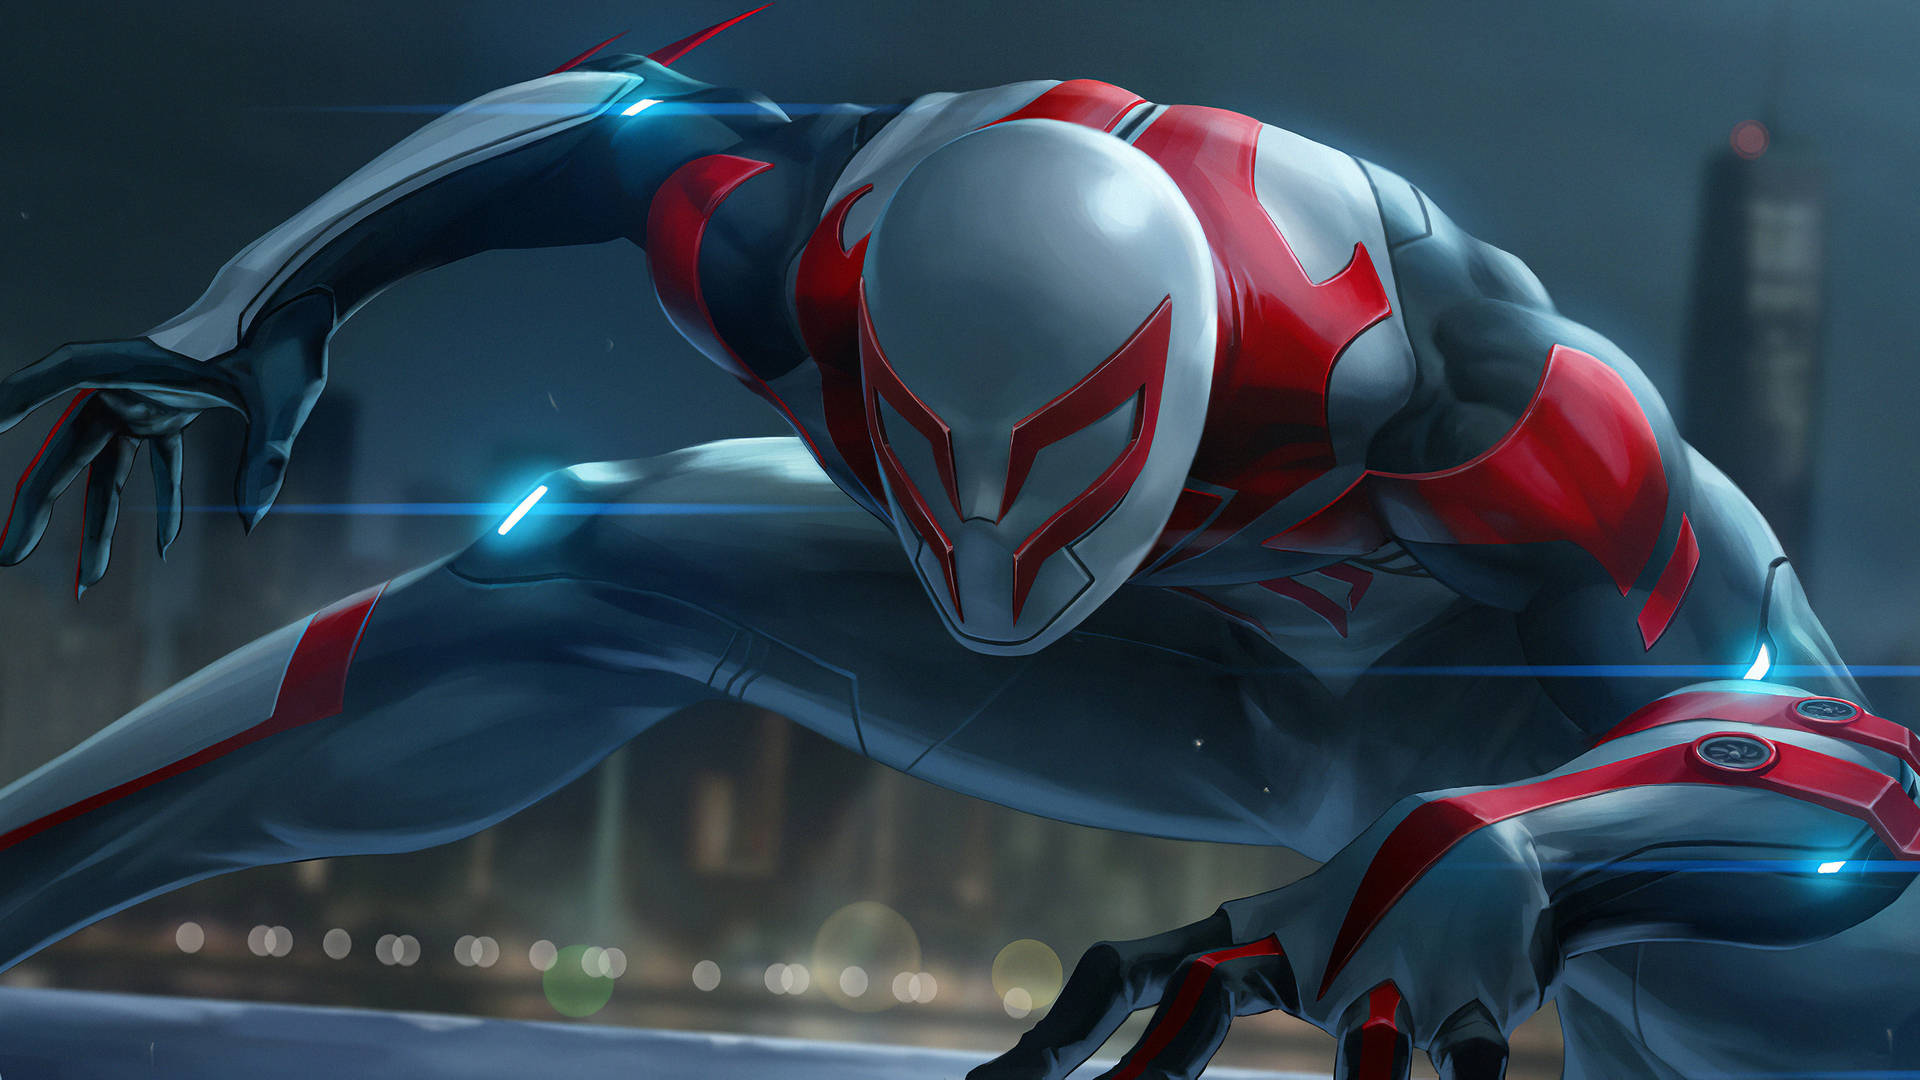 Spider-man White Blue Red Suit At Night Wallpaper